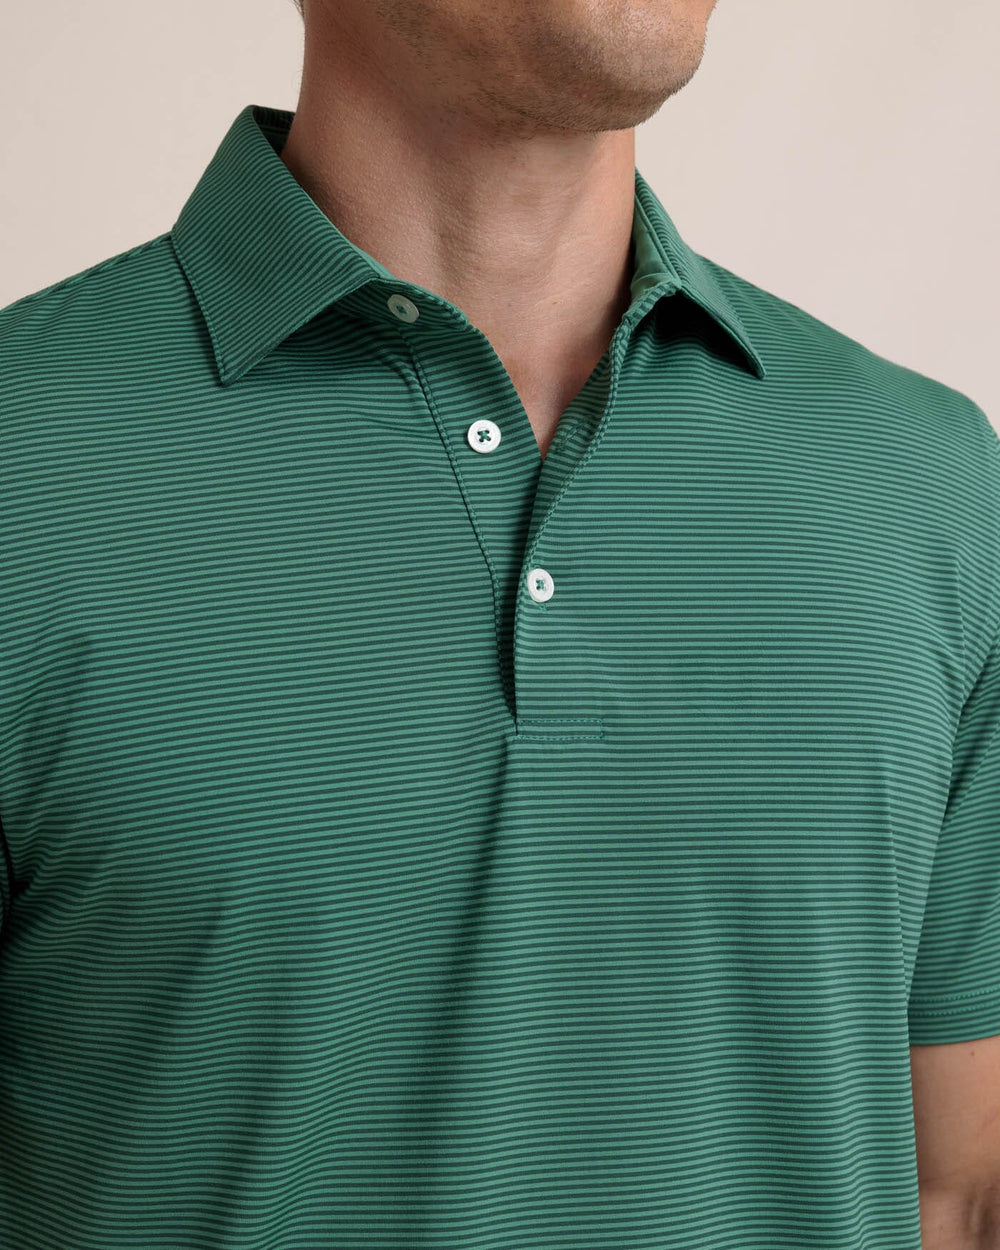 The detail view of the Southern Tide brrr-eeze Meadowbrook Stripe Polo by Southern Tide - Fir